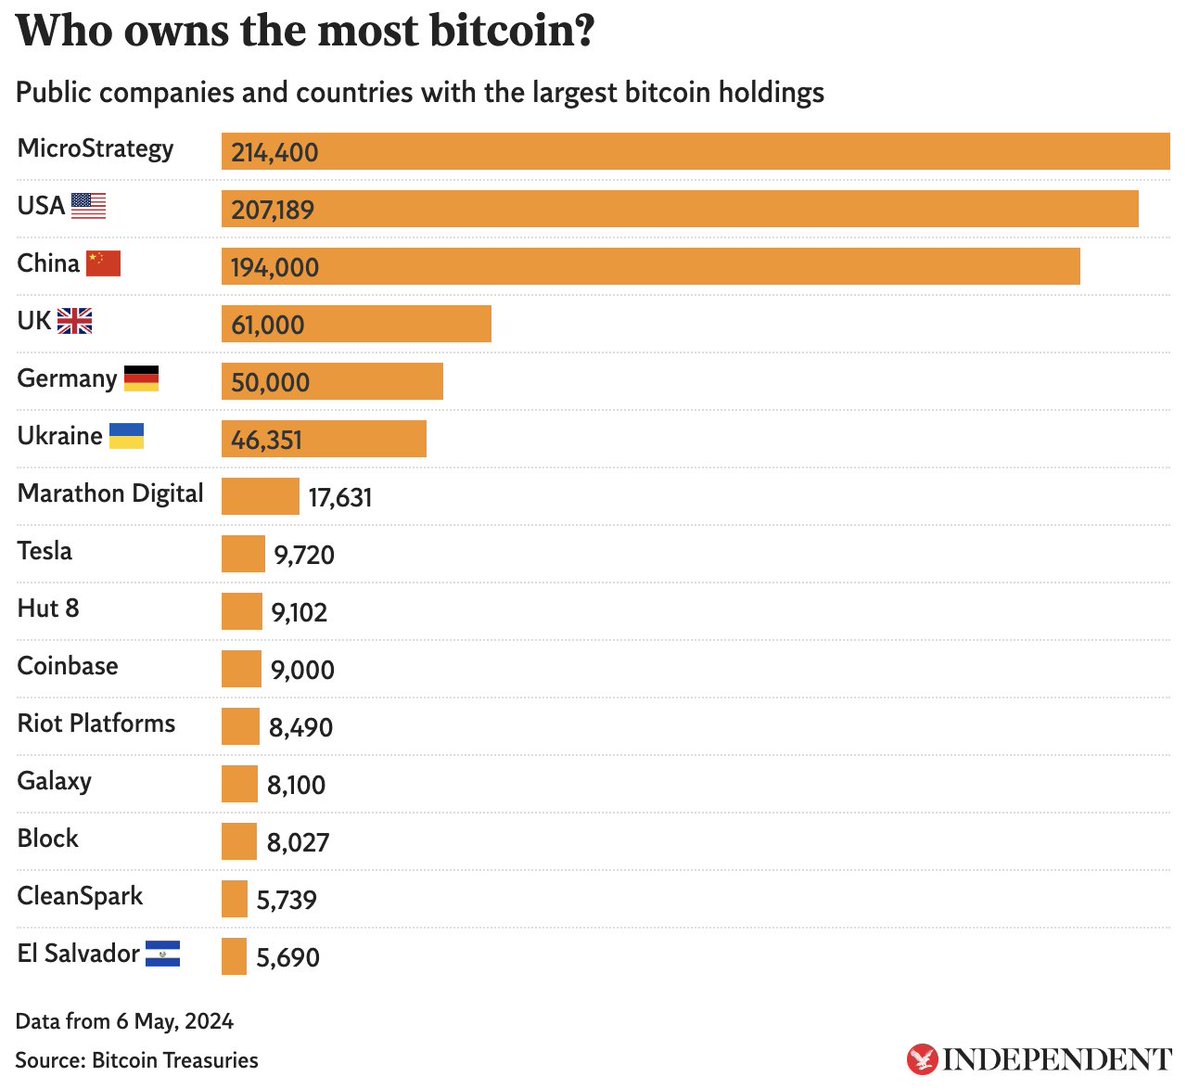 MicroStrategy now owns more #Bitcoin than any country in the world 🤯